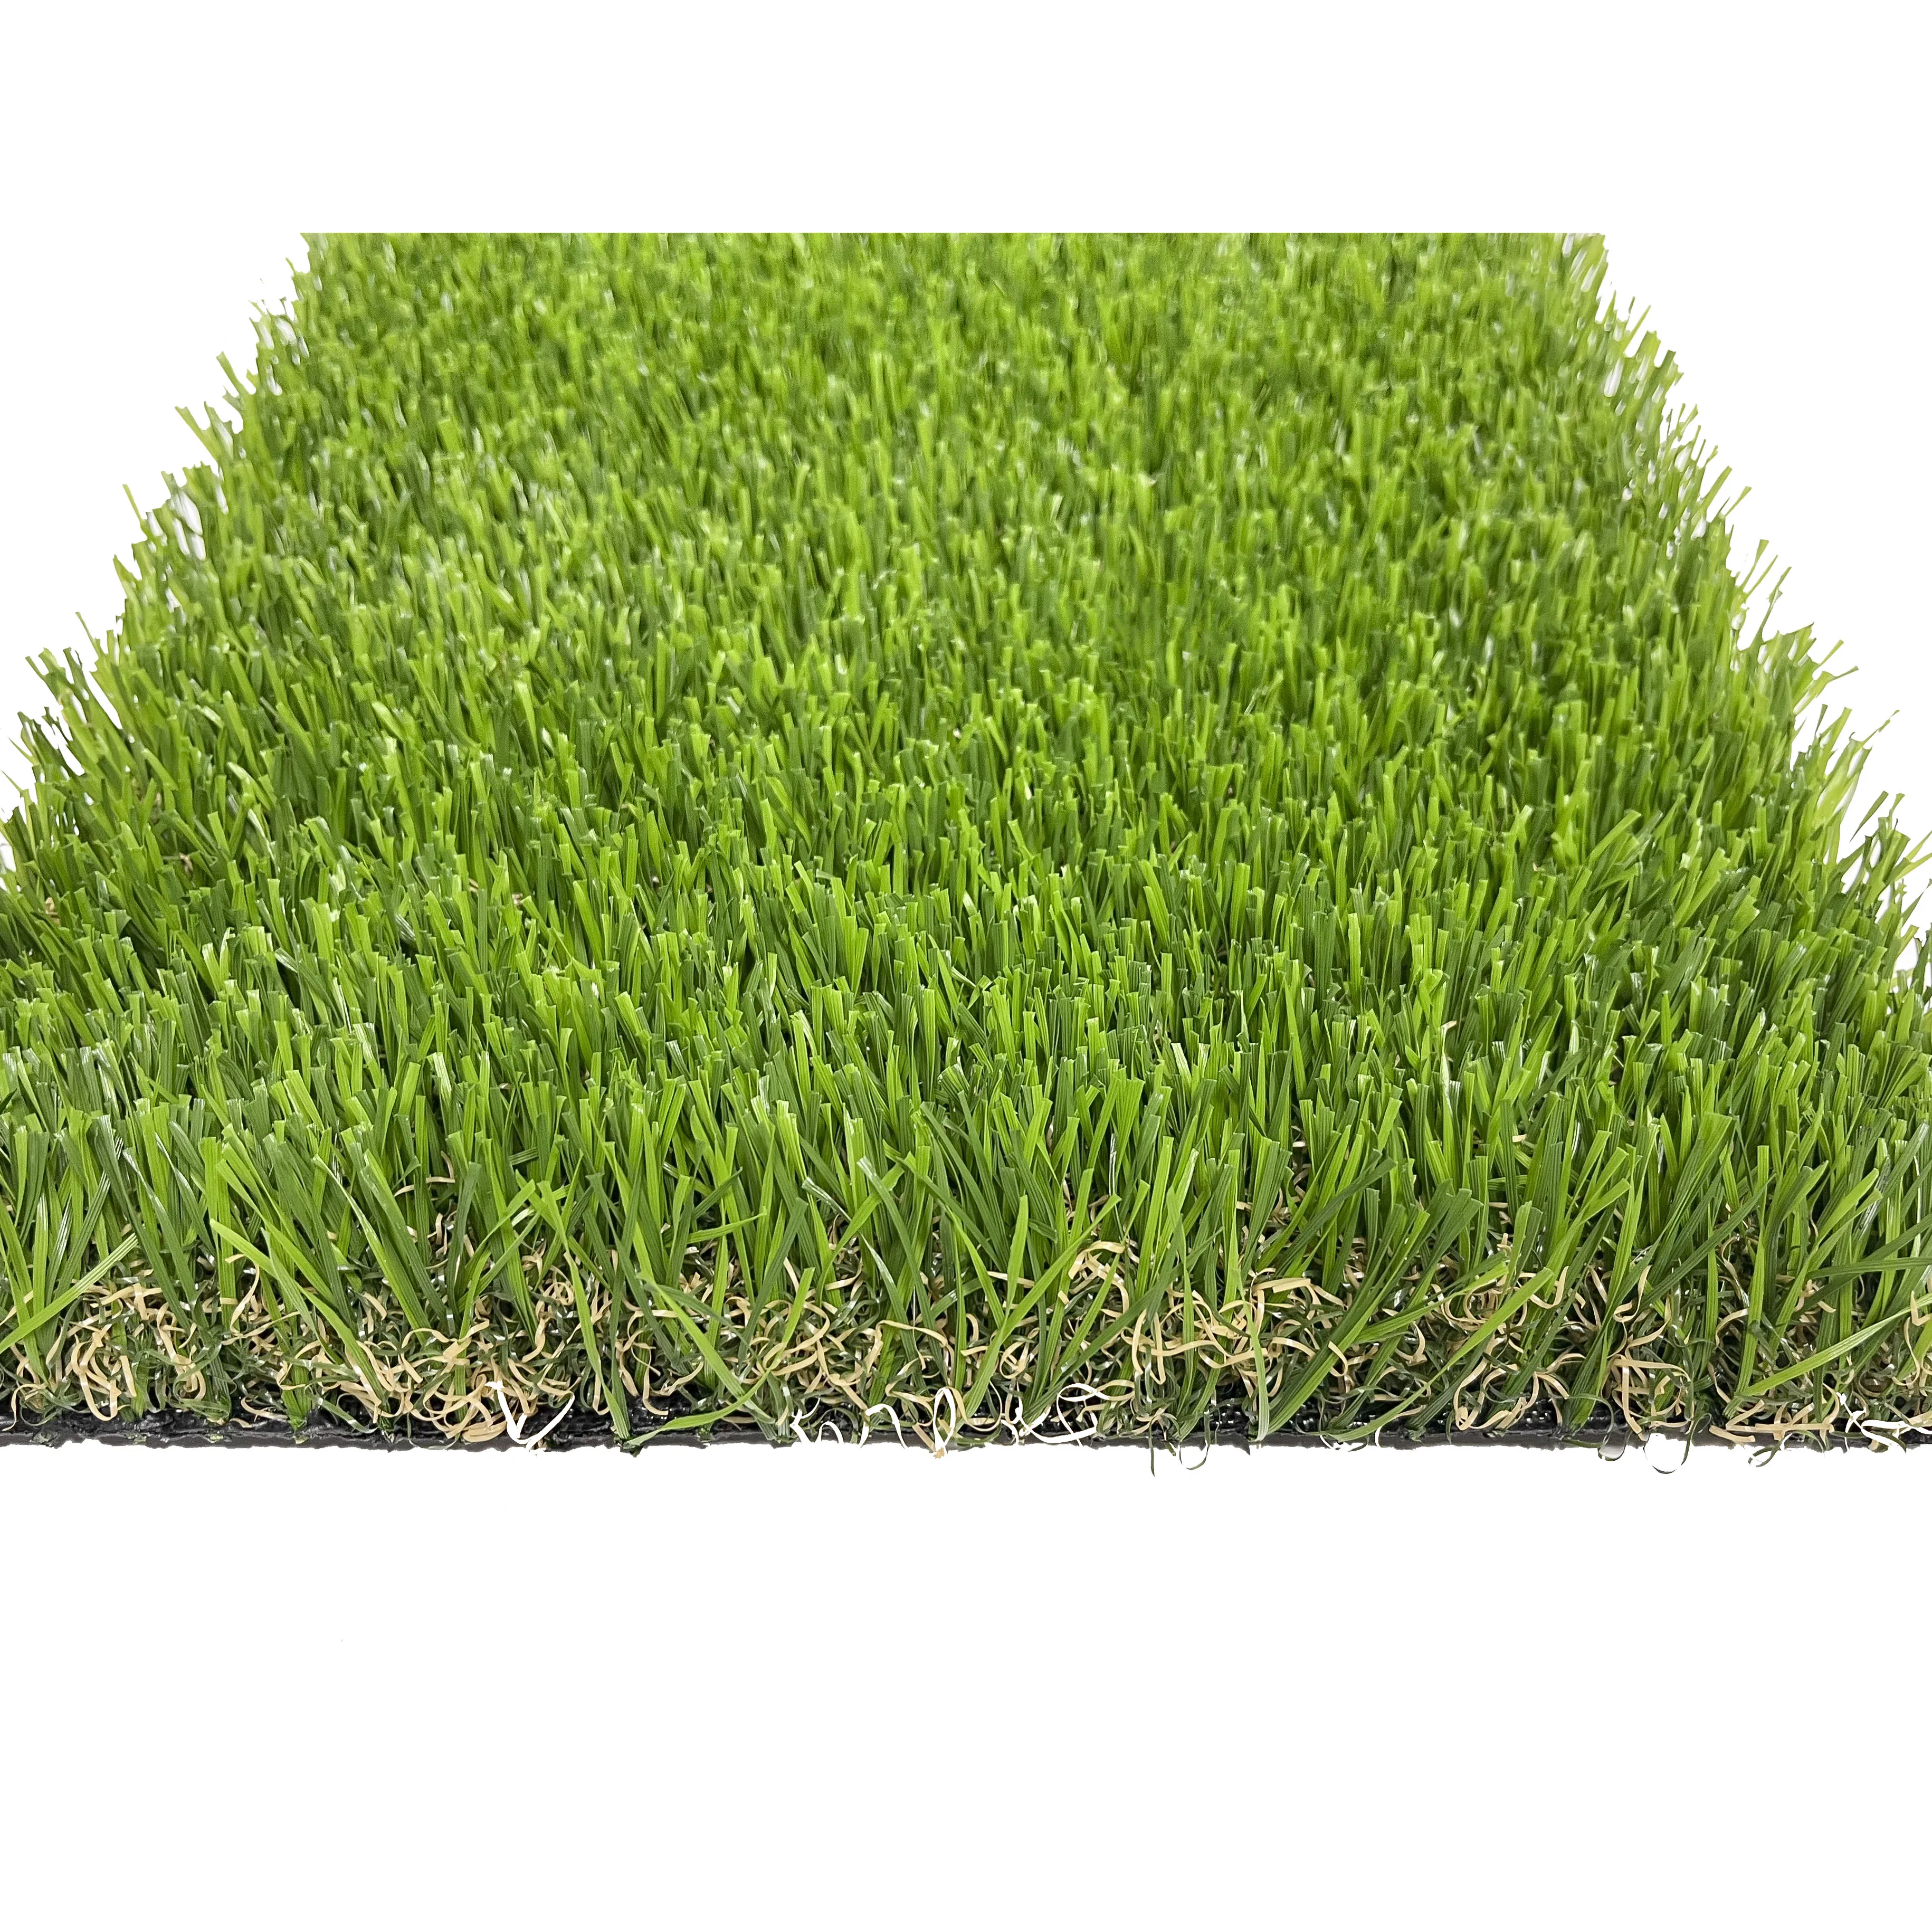 JS High Quality Indoor Outdoor Mini Golf Grass Carpet Putting Green For Golf Course